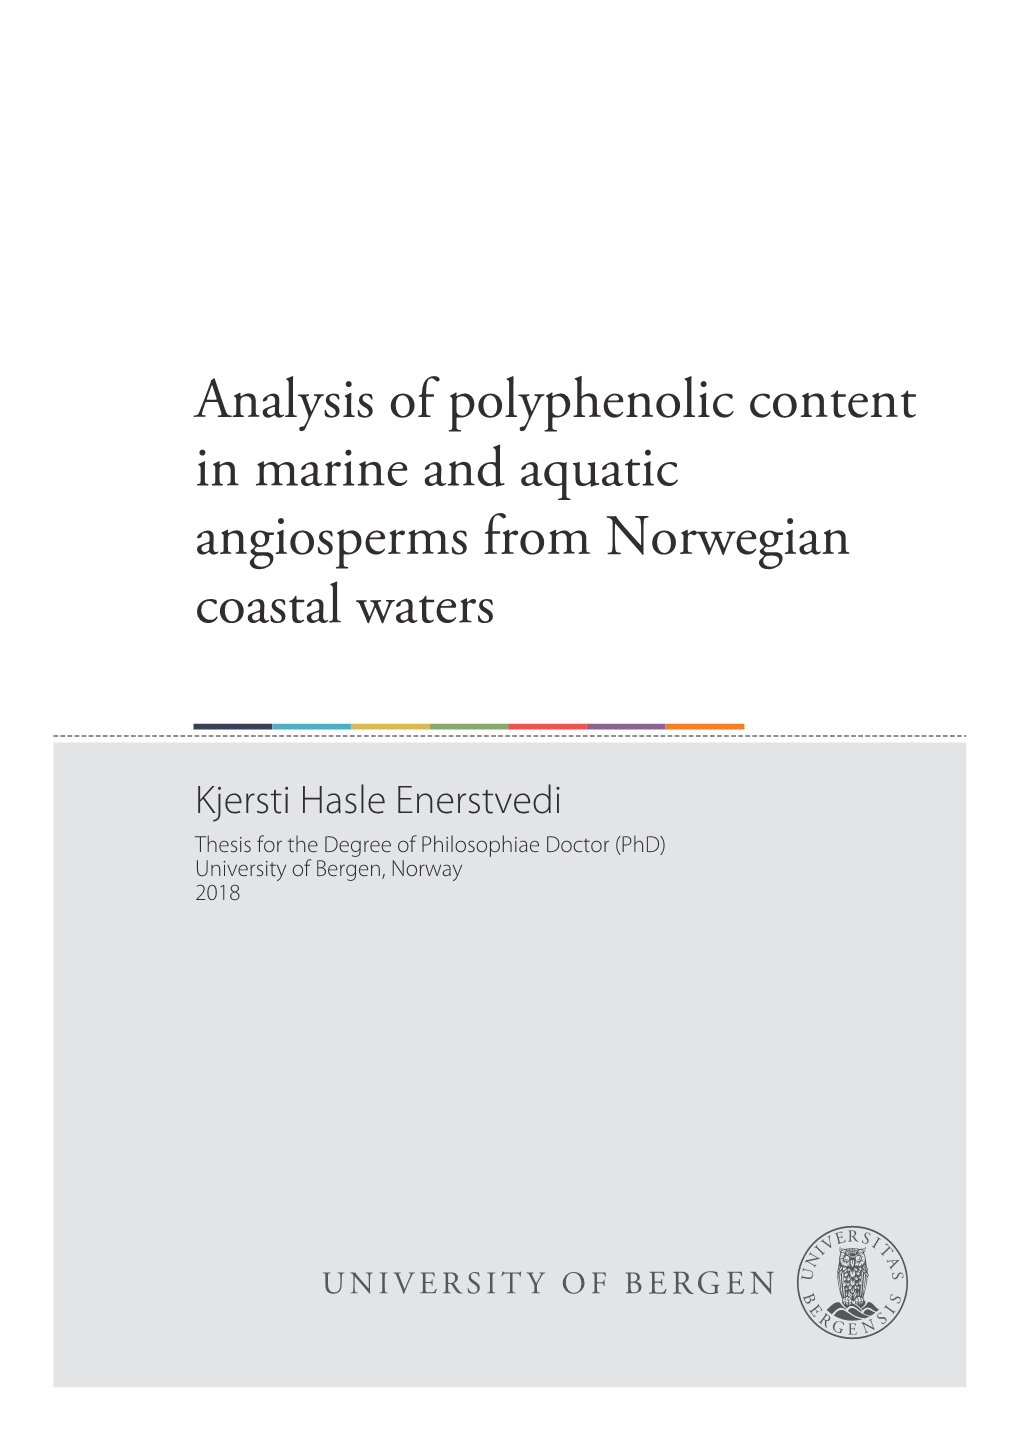 Analysis of Polyphenolic Content in Marine and Aquatic Angiosperms from Norwegian Coastal Waters